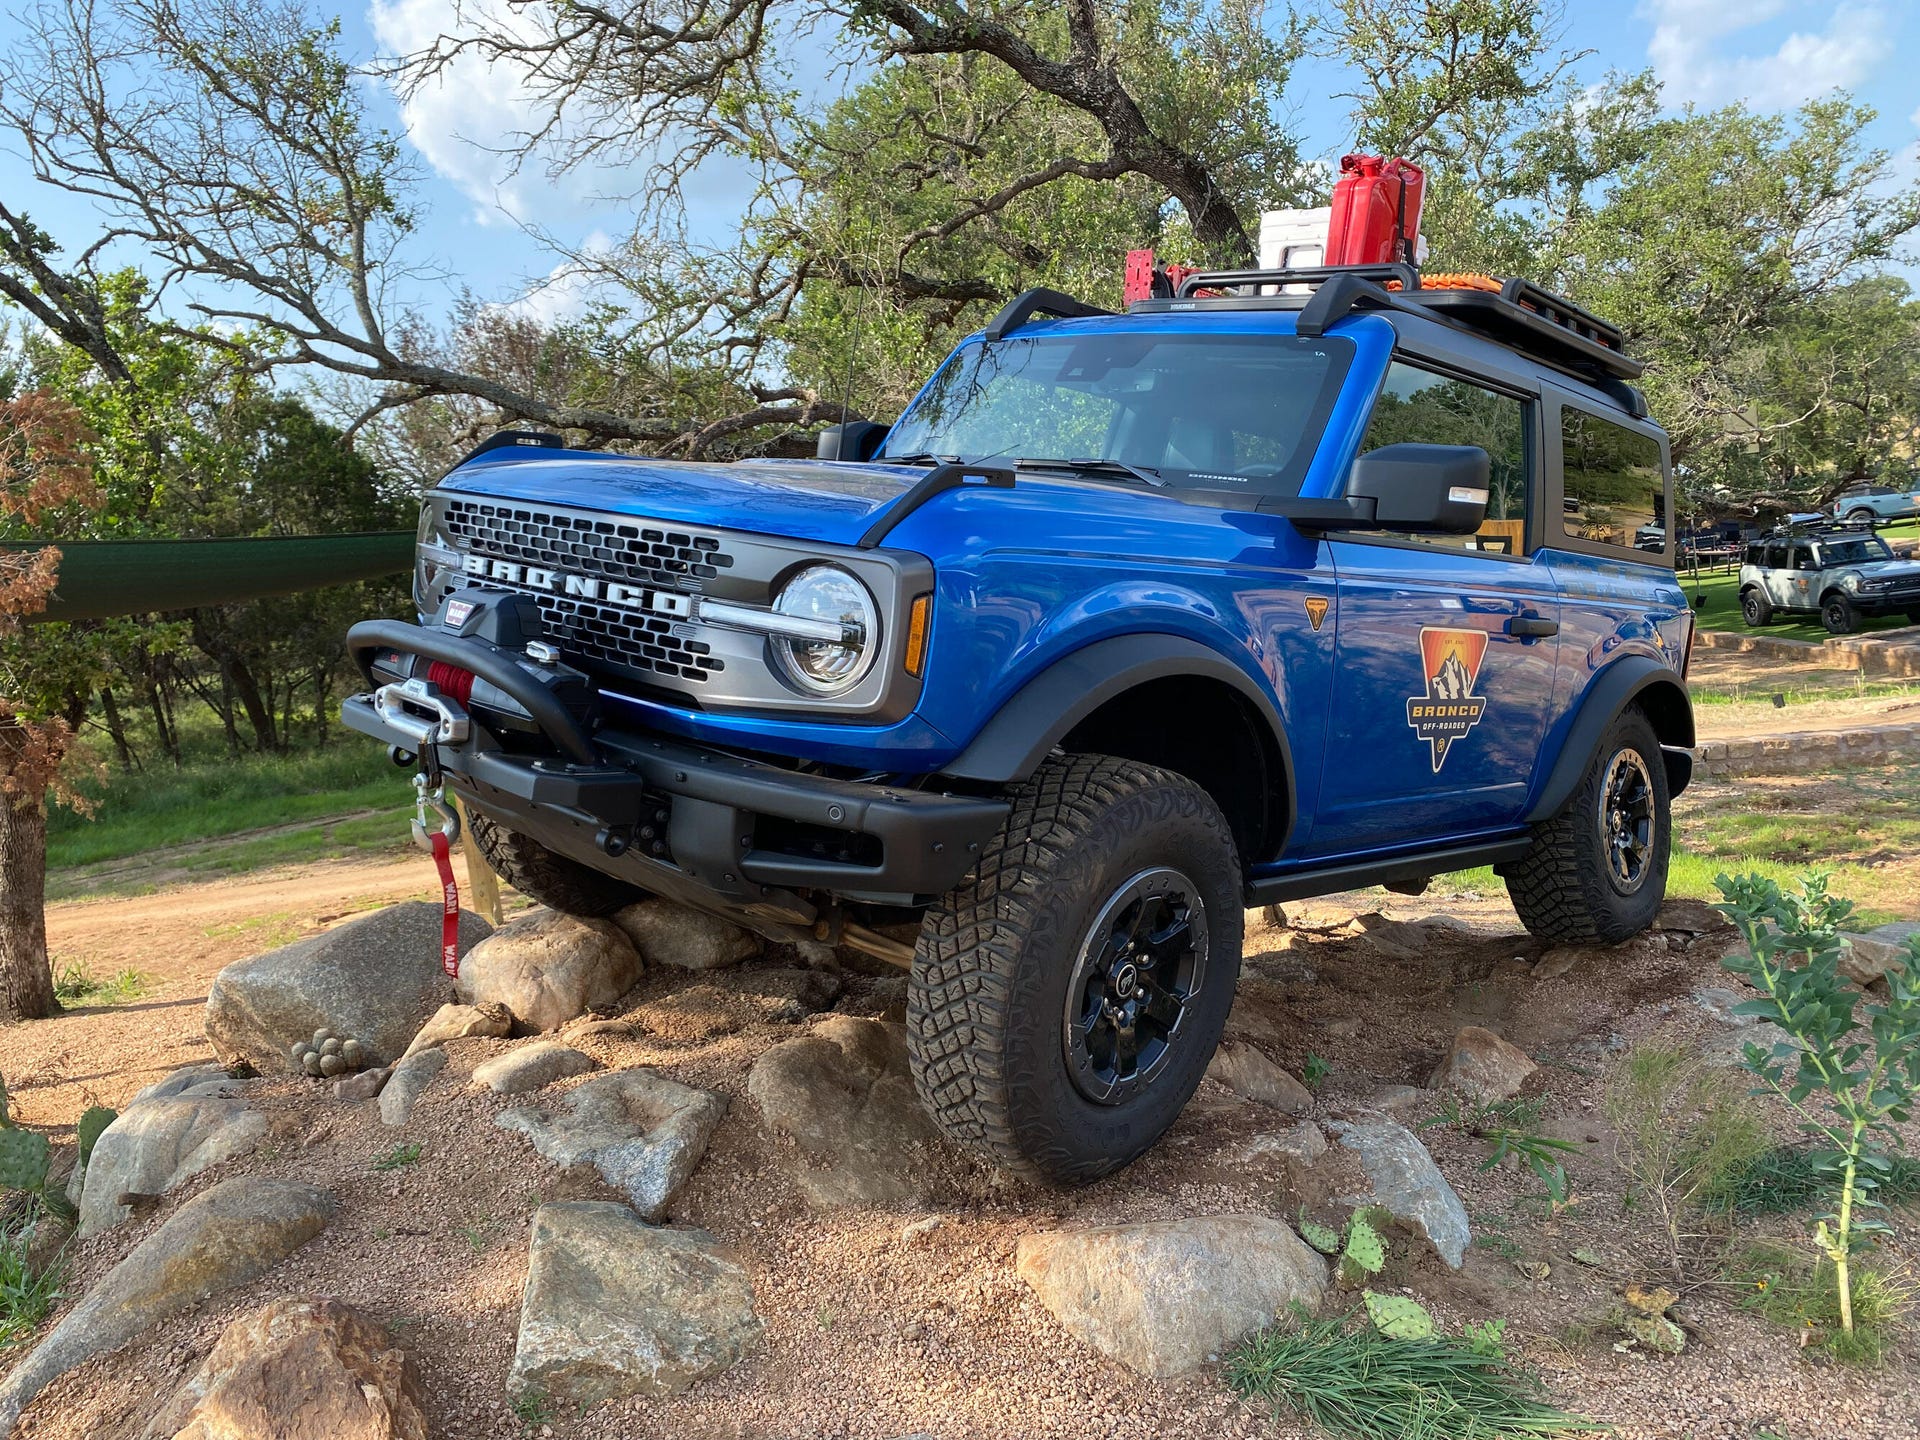 2021 Ford Bronco - Blue accessorized two-door Sasquatch model